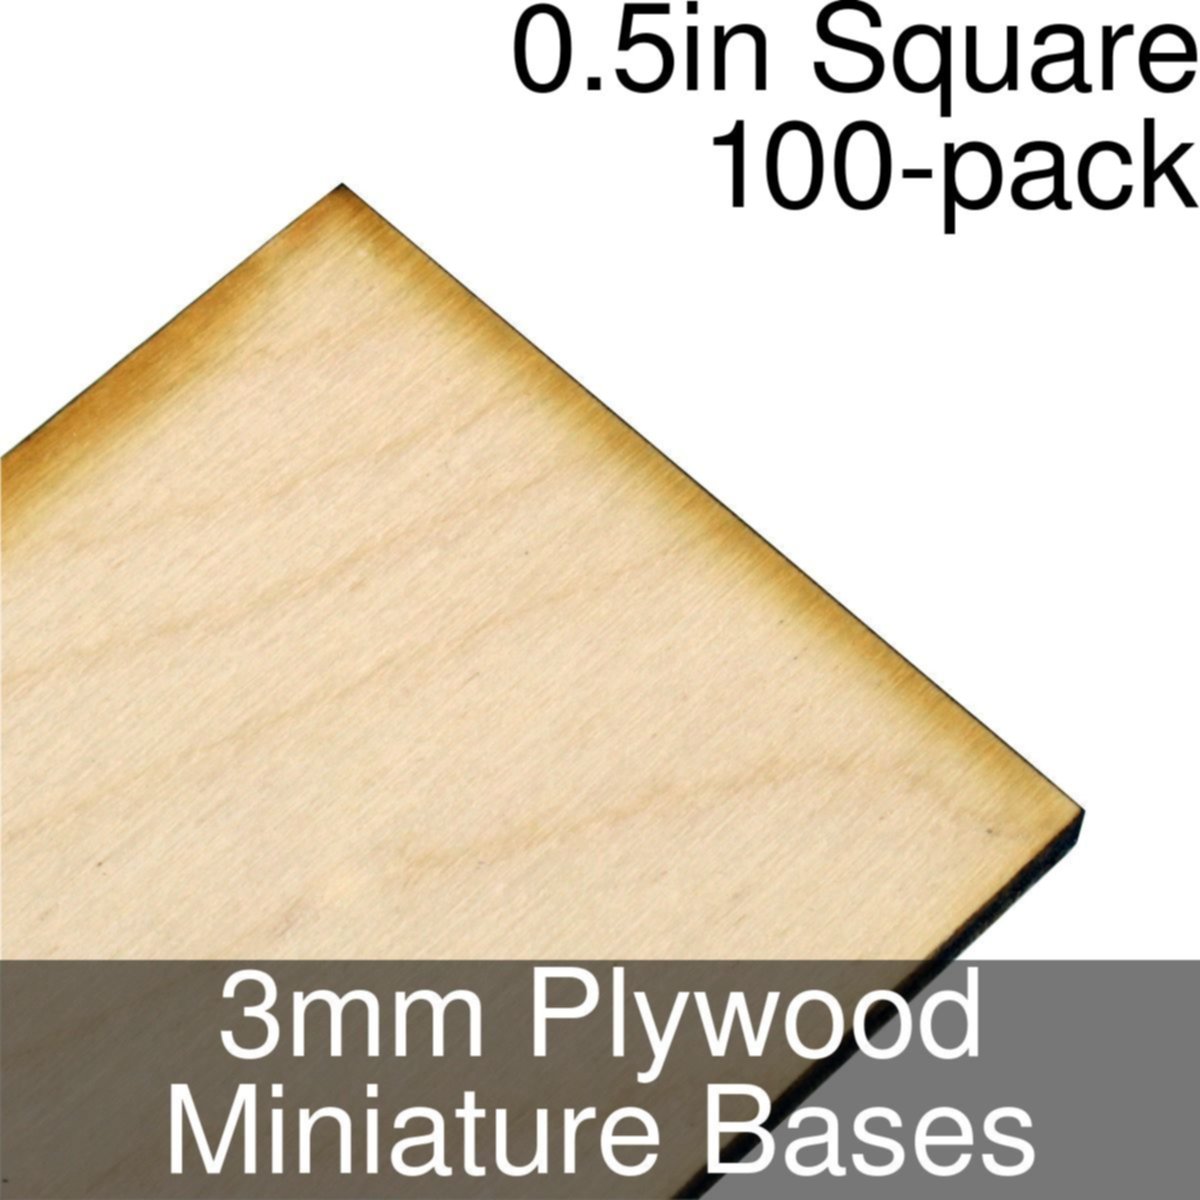 0.5-inch square miniature bases